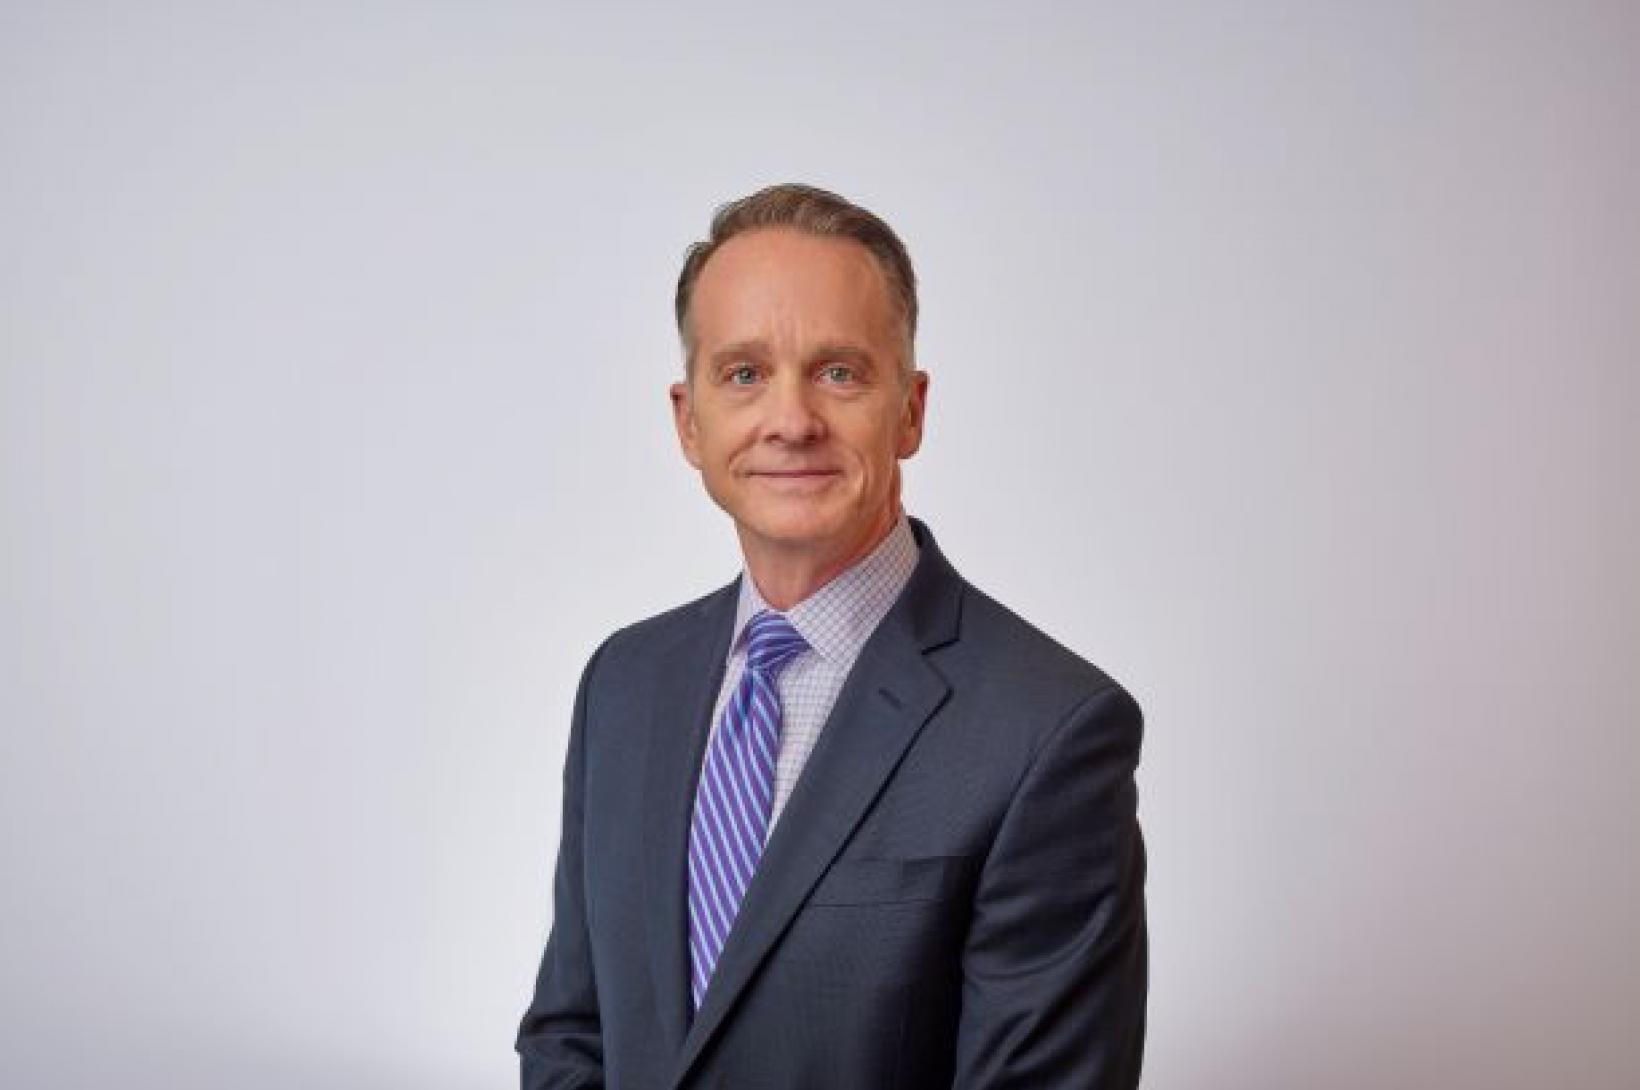 Headshot of Steve Johnson, Chief Business Attraction Officer for Greater St. Louis, Inc. and President of its business attraction initiative AllianceSTL